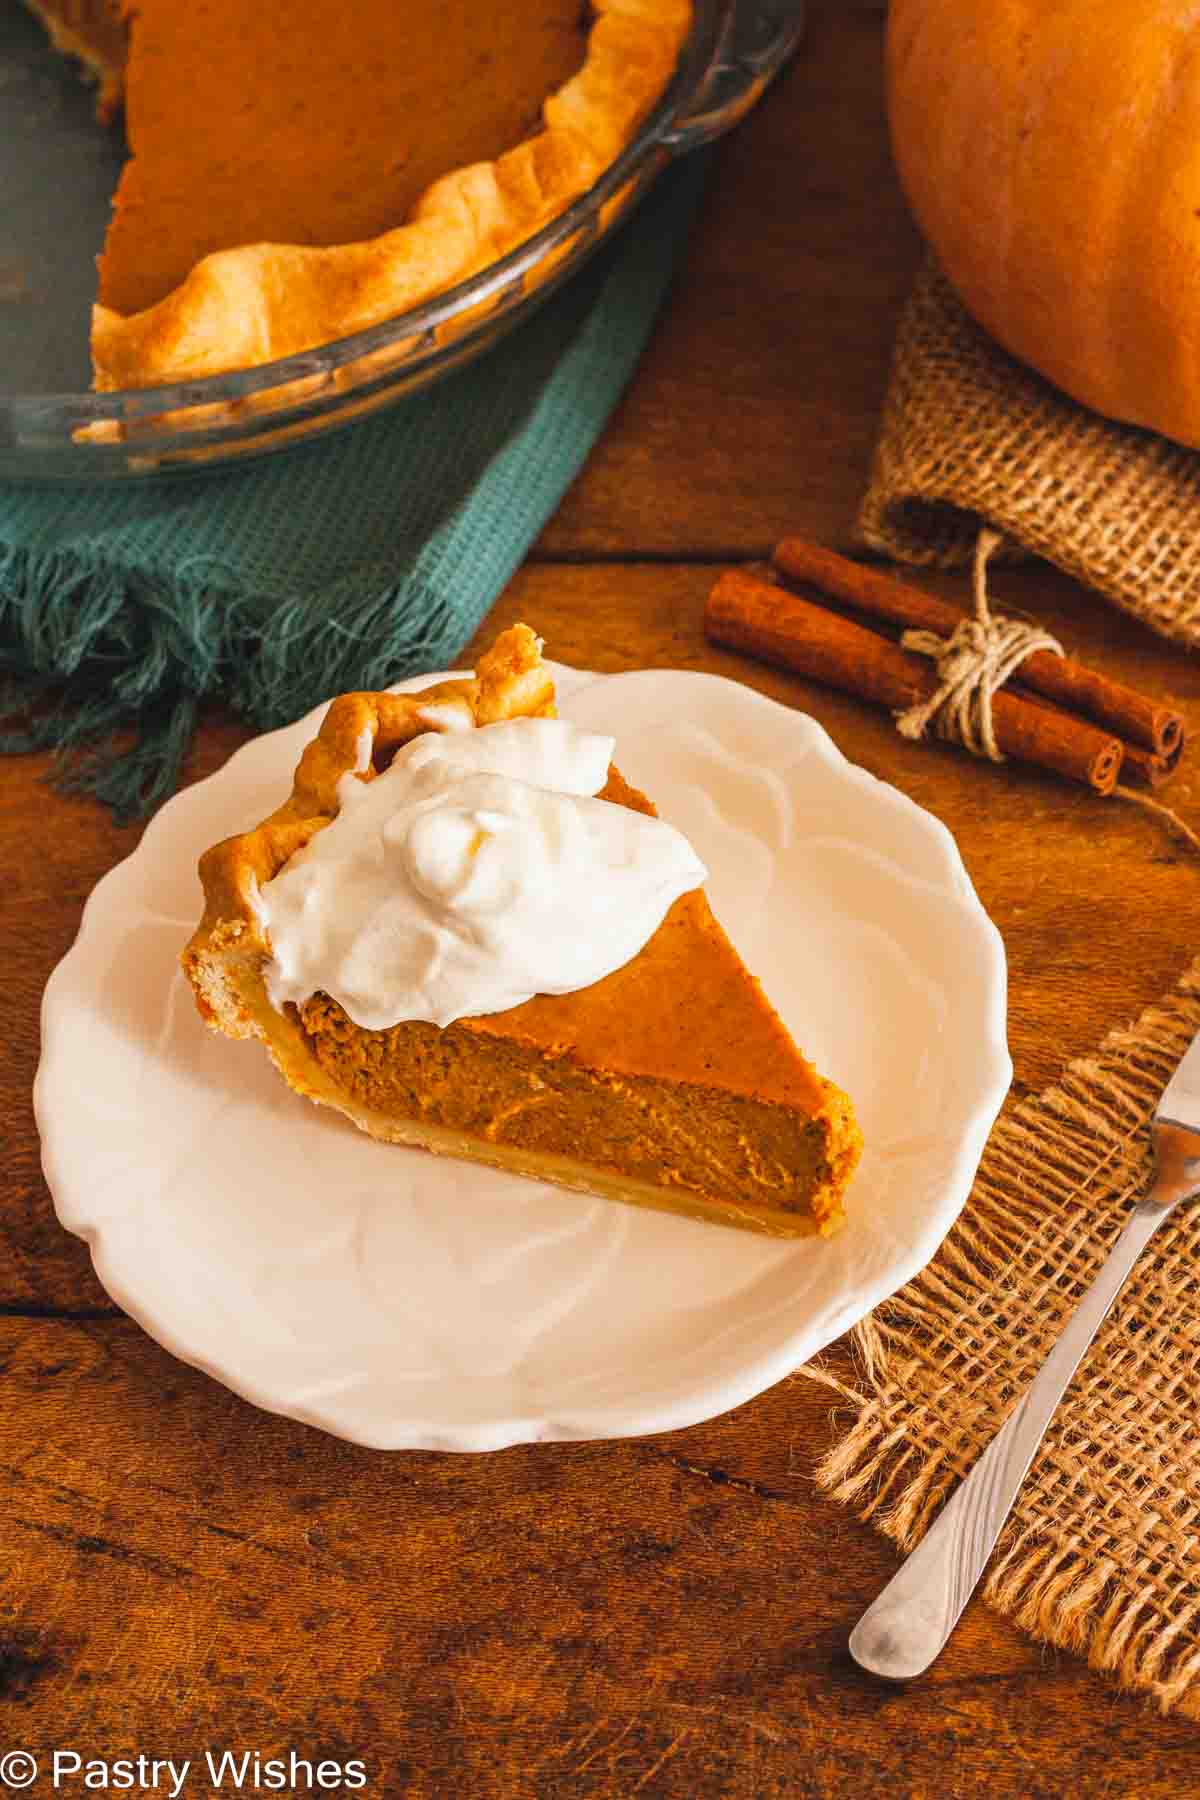 A slice of pumpkin pie on a white plate topped with whipped cream on a wooden surface next to cinnamon sticks and a pumpkin.